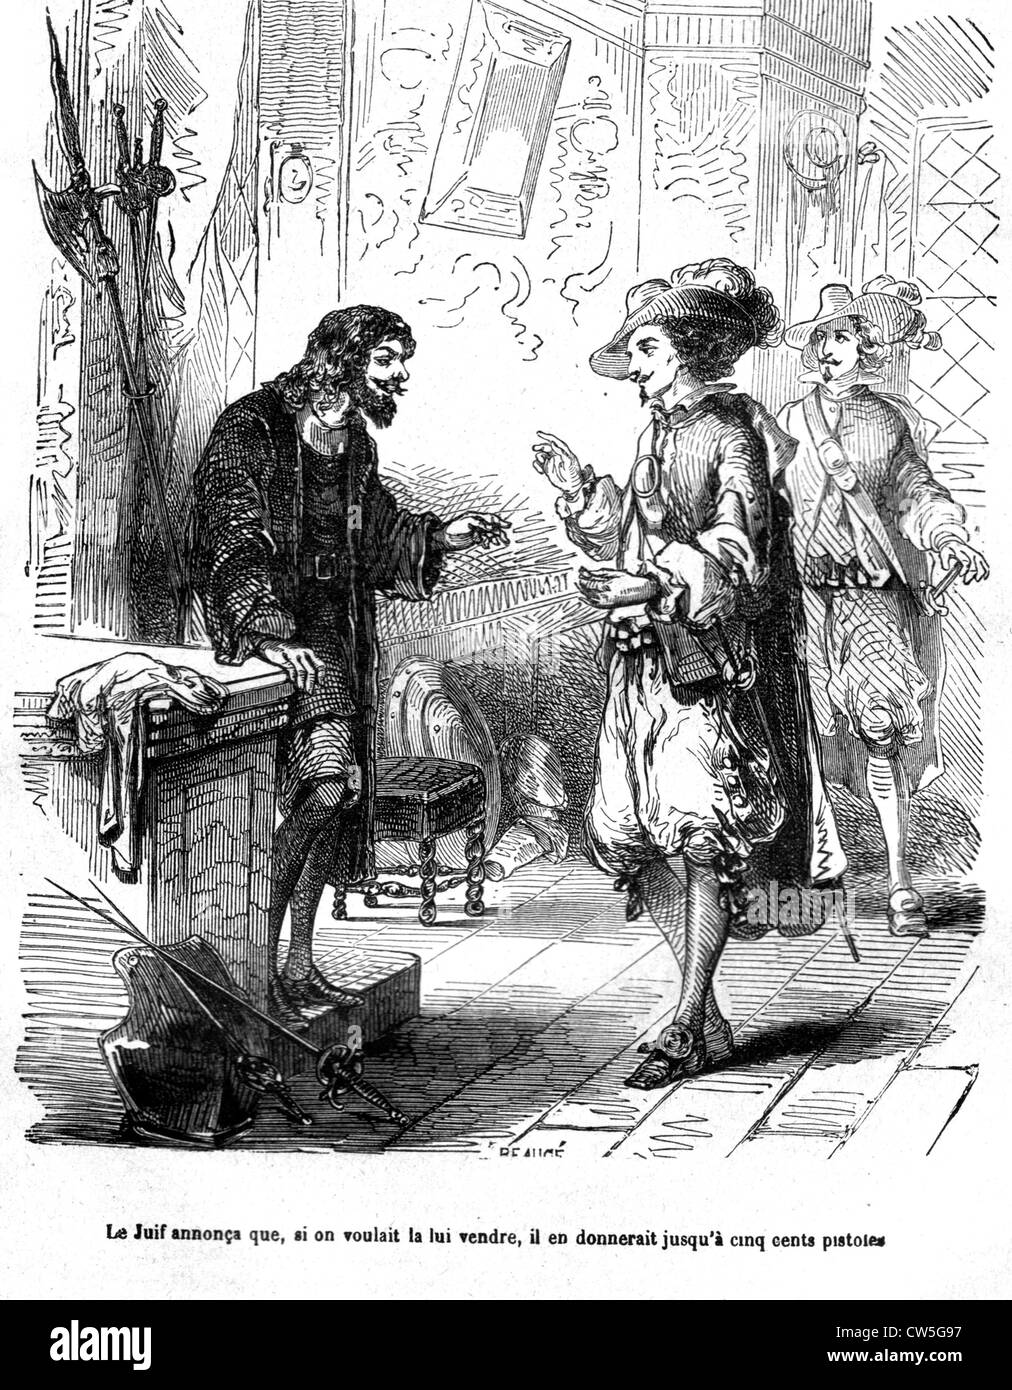 The Three Musketeers, Athos and d'Artagnan at a Jewish shopkeeper's ...